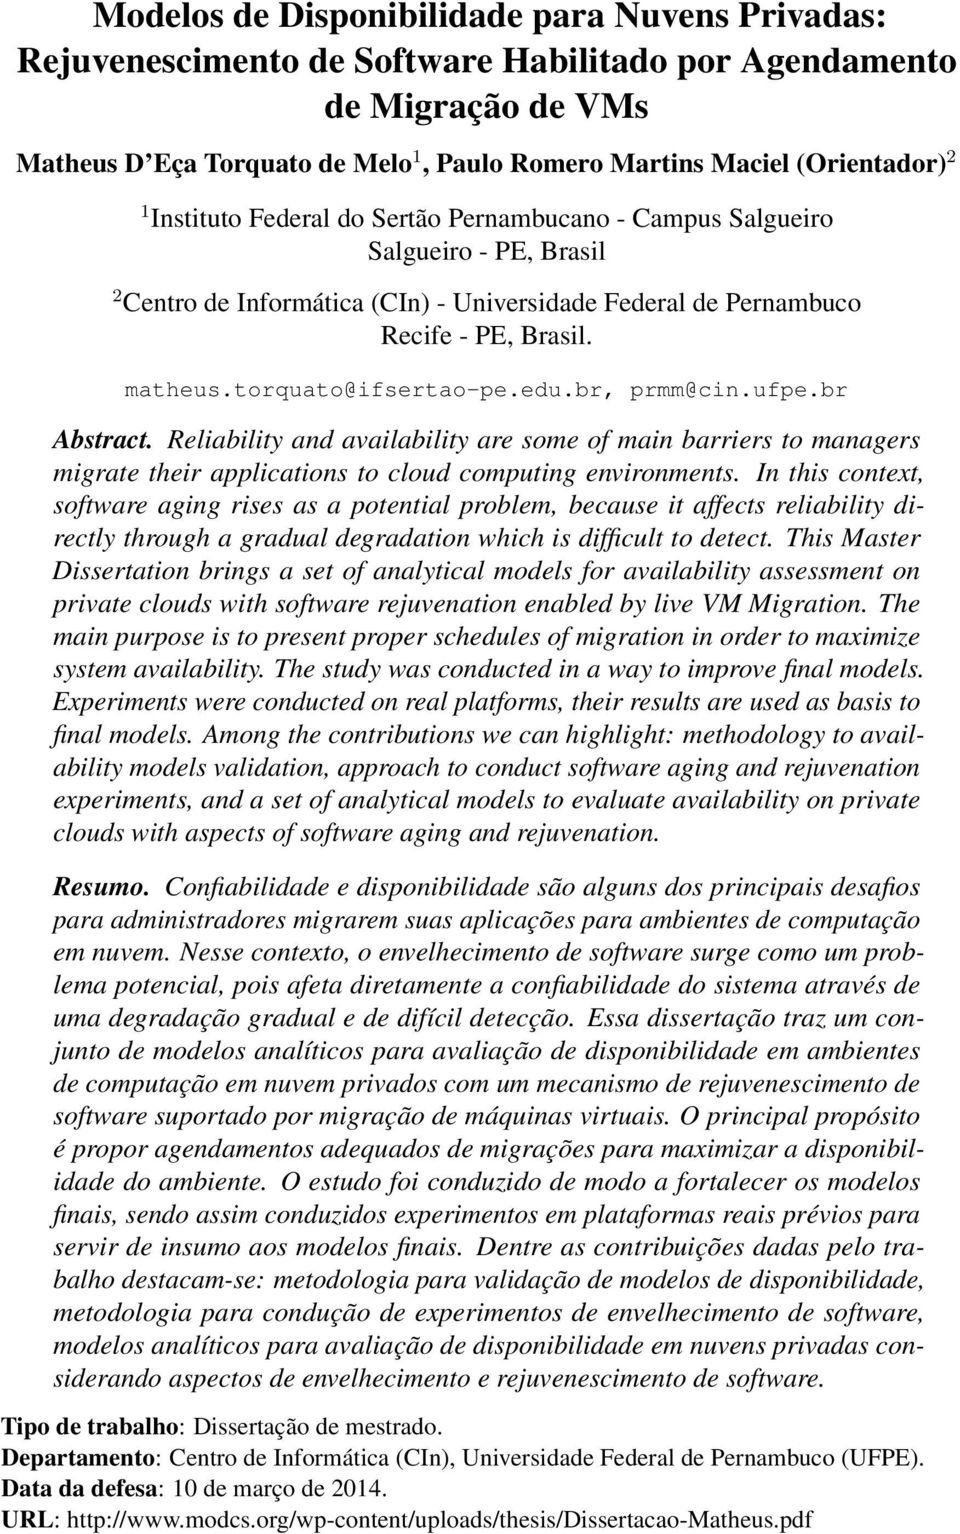 torquato@ifsertao-pe.edu.br, prmm@cin.ufpe.br Abstract. Reliability and availability are some of main barriers to managers migrate their applications to cloud computing environments.